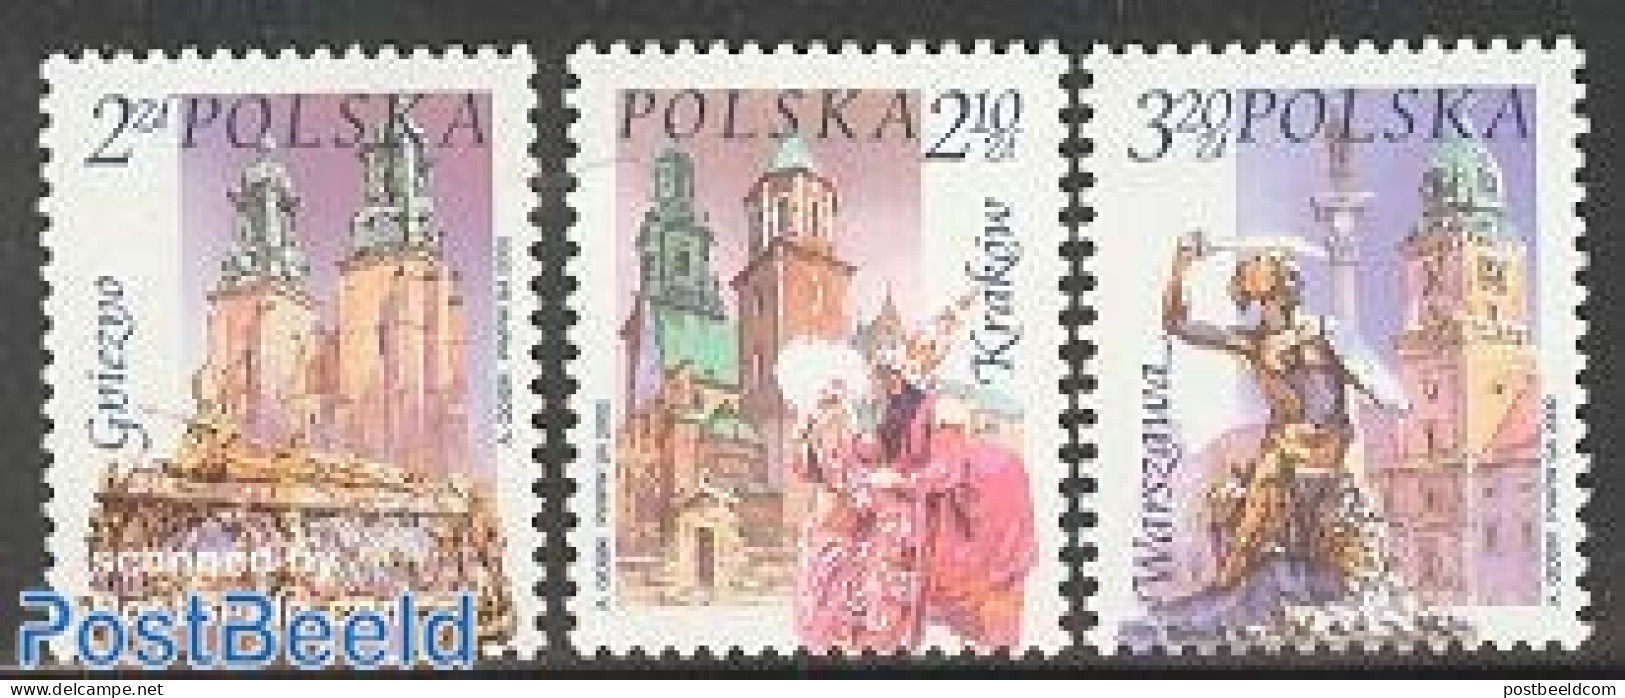 Poland 2002 City Folklore 3v, Mint NH, Religion - Various - Churches, Temples, Mosques, Synagogues - Folklore - Ongebruikt